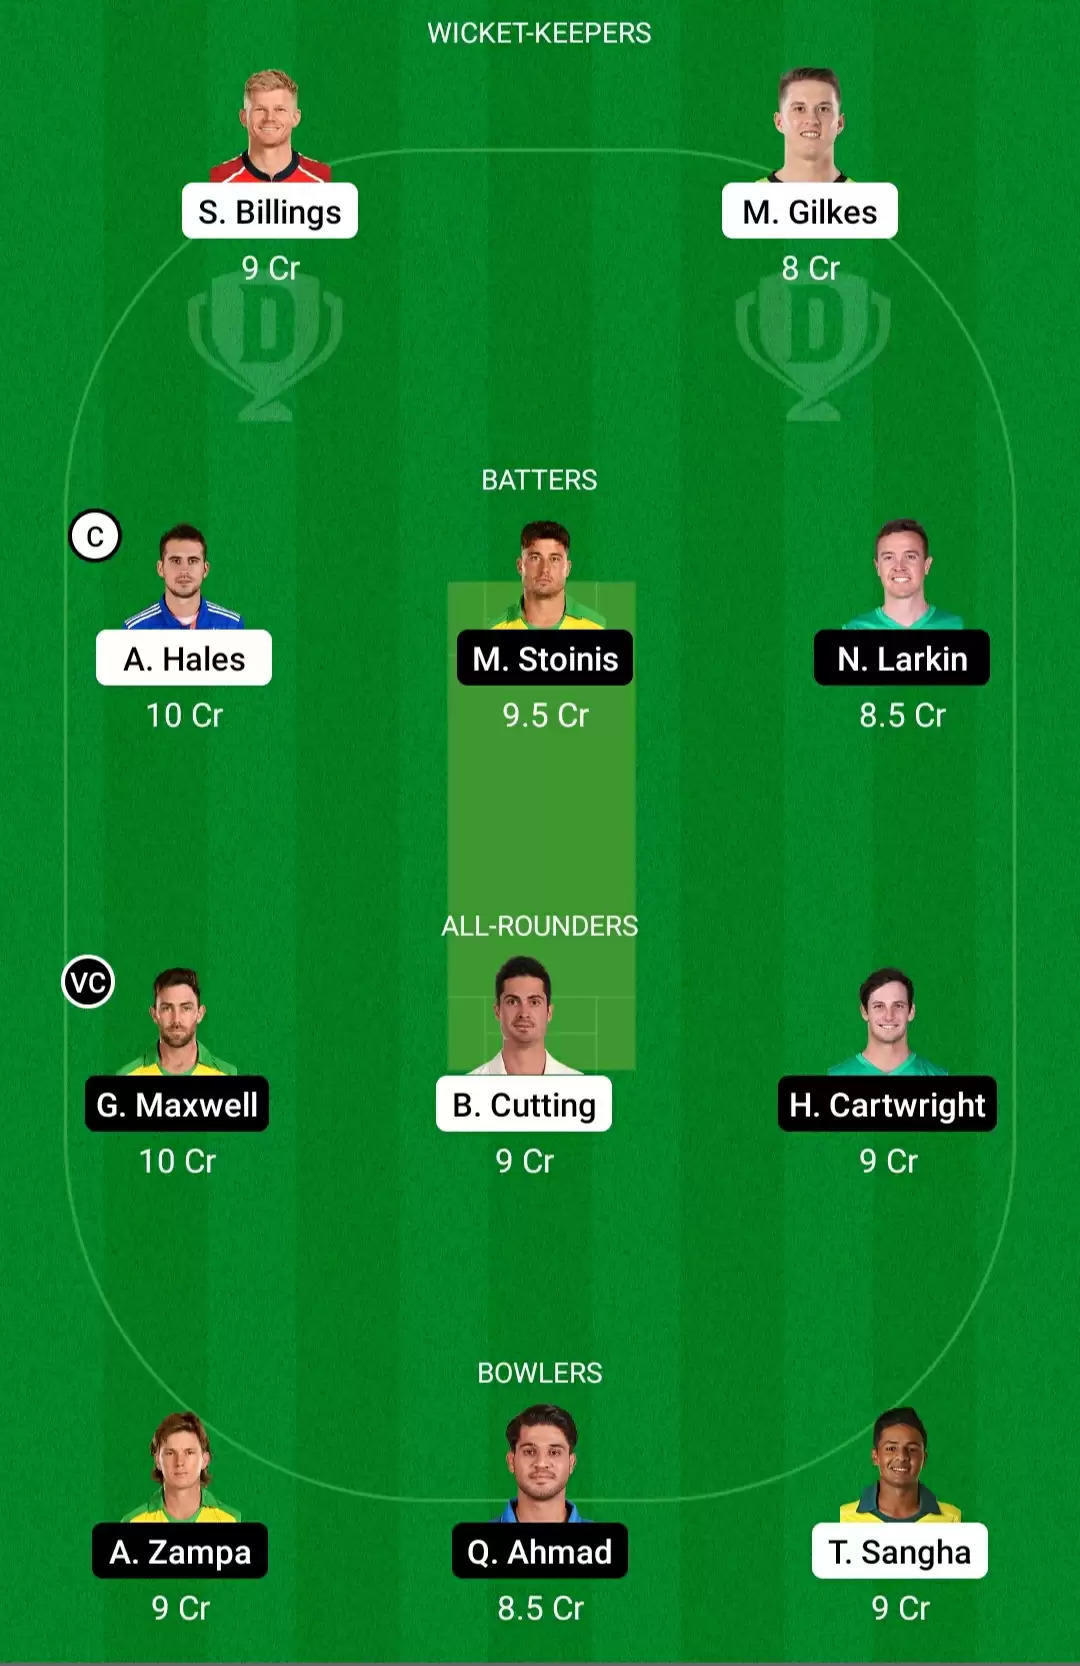 THU vs STA Dream11 Prediction, Big Bash League 2020-21, Match 10: Playing XI, Fantasy Cricket Tips, Team, Weather Updates and Pitch Report